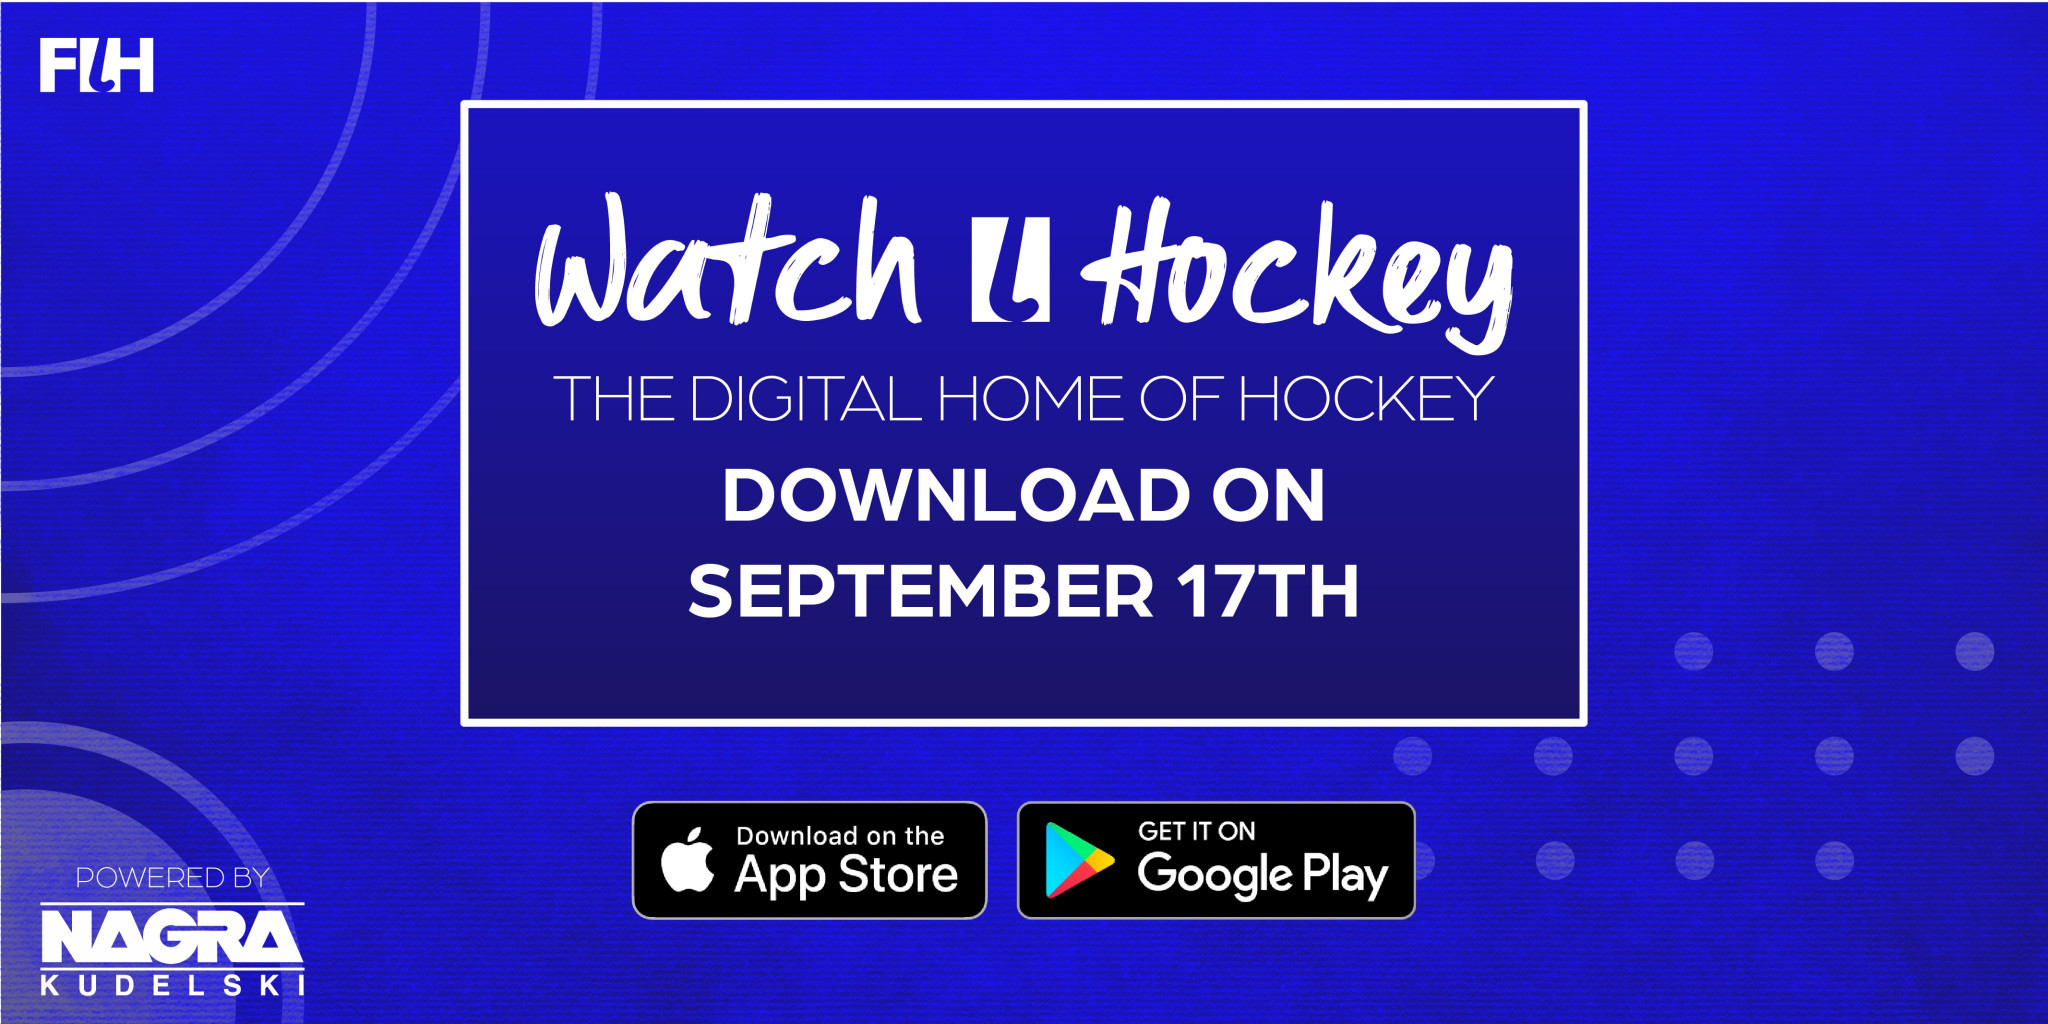 The new app will launch on September 17, having been moved back from September 15 ©FIH